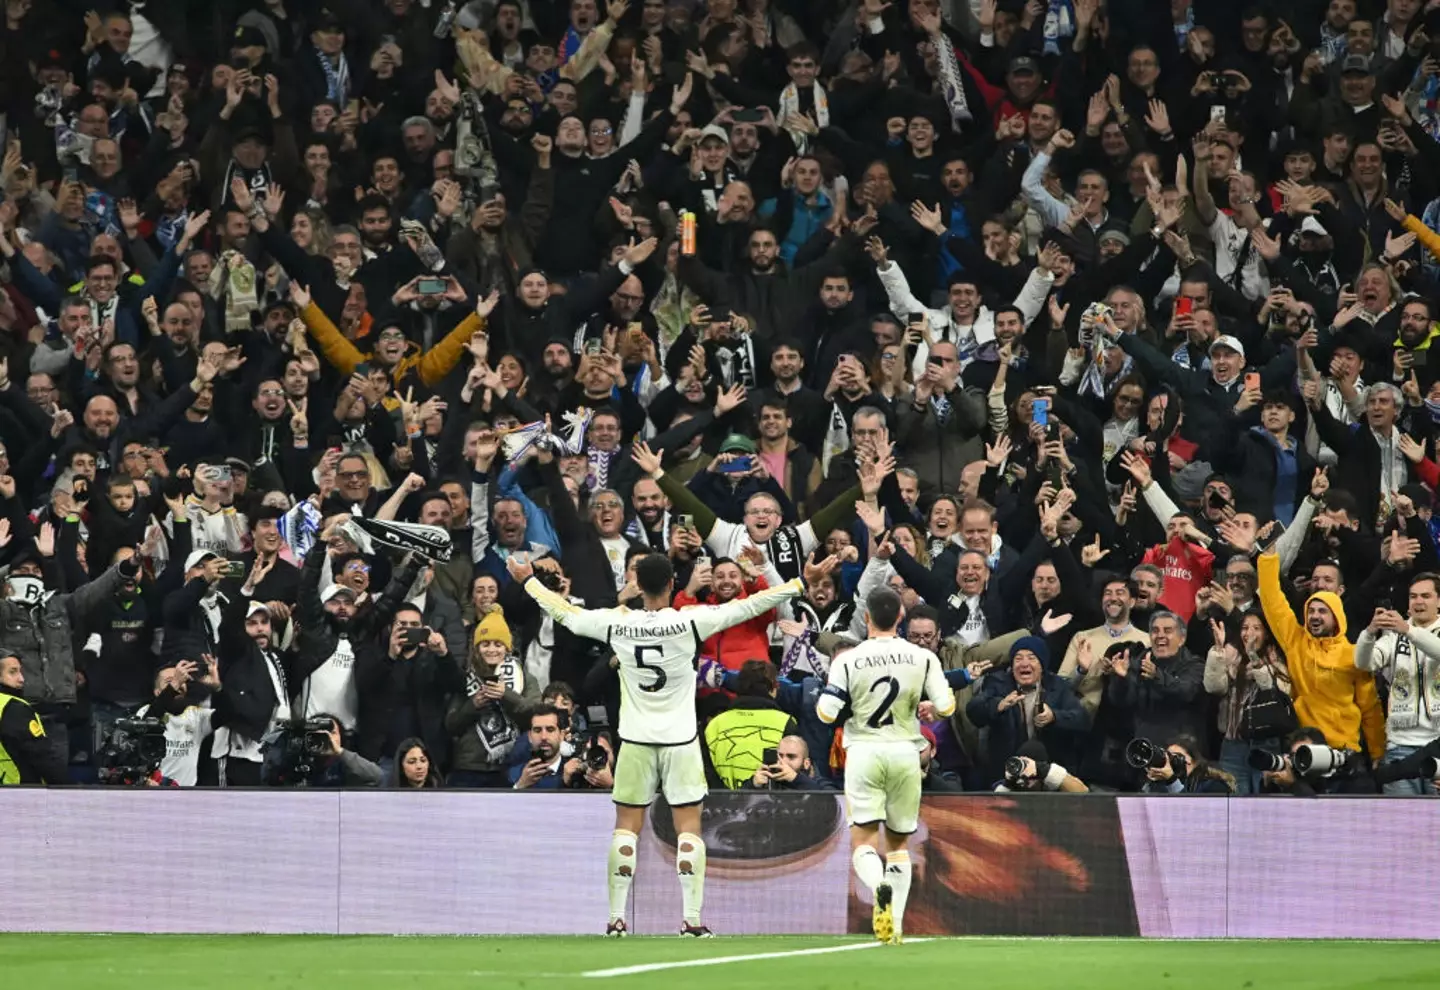 Jude Bellingham scored again for Real Madrid last night (Image: Getty)